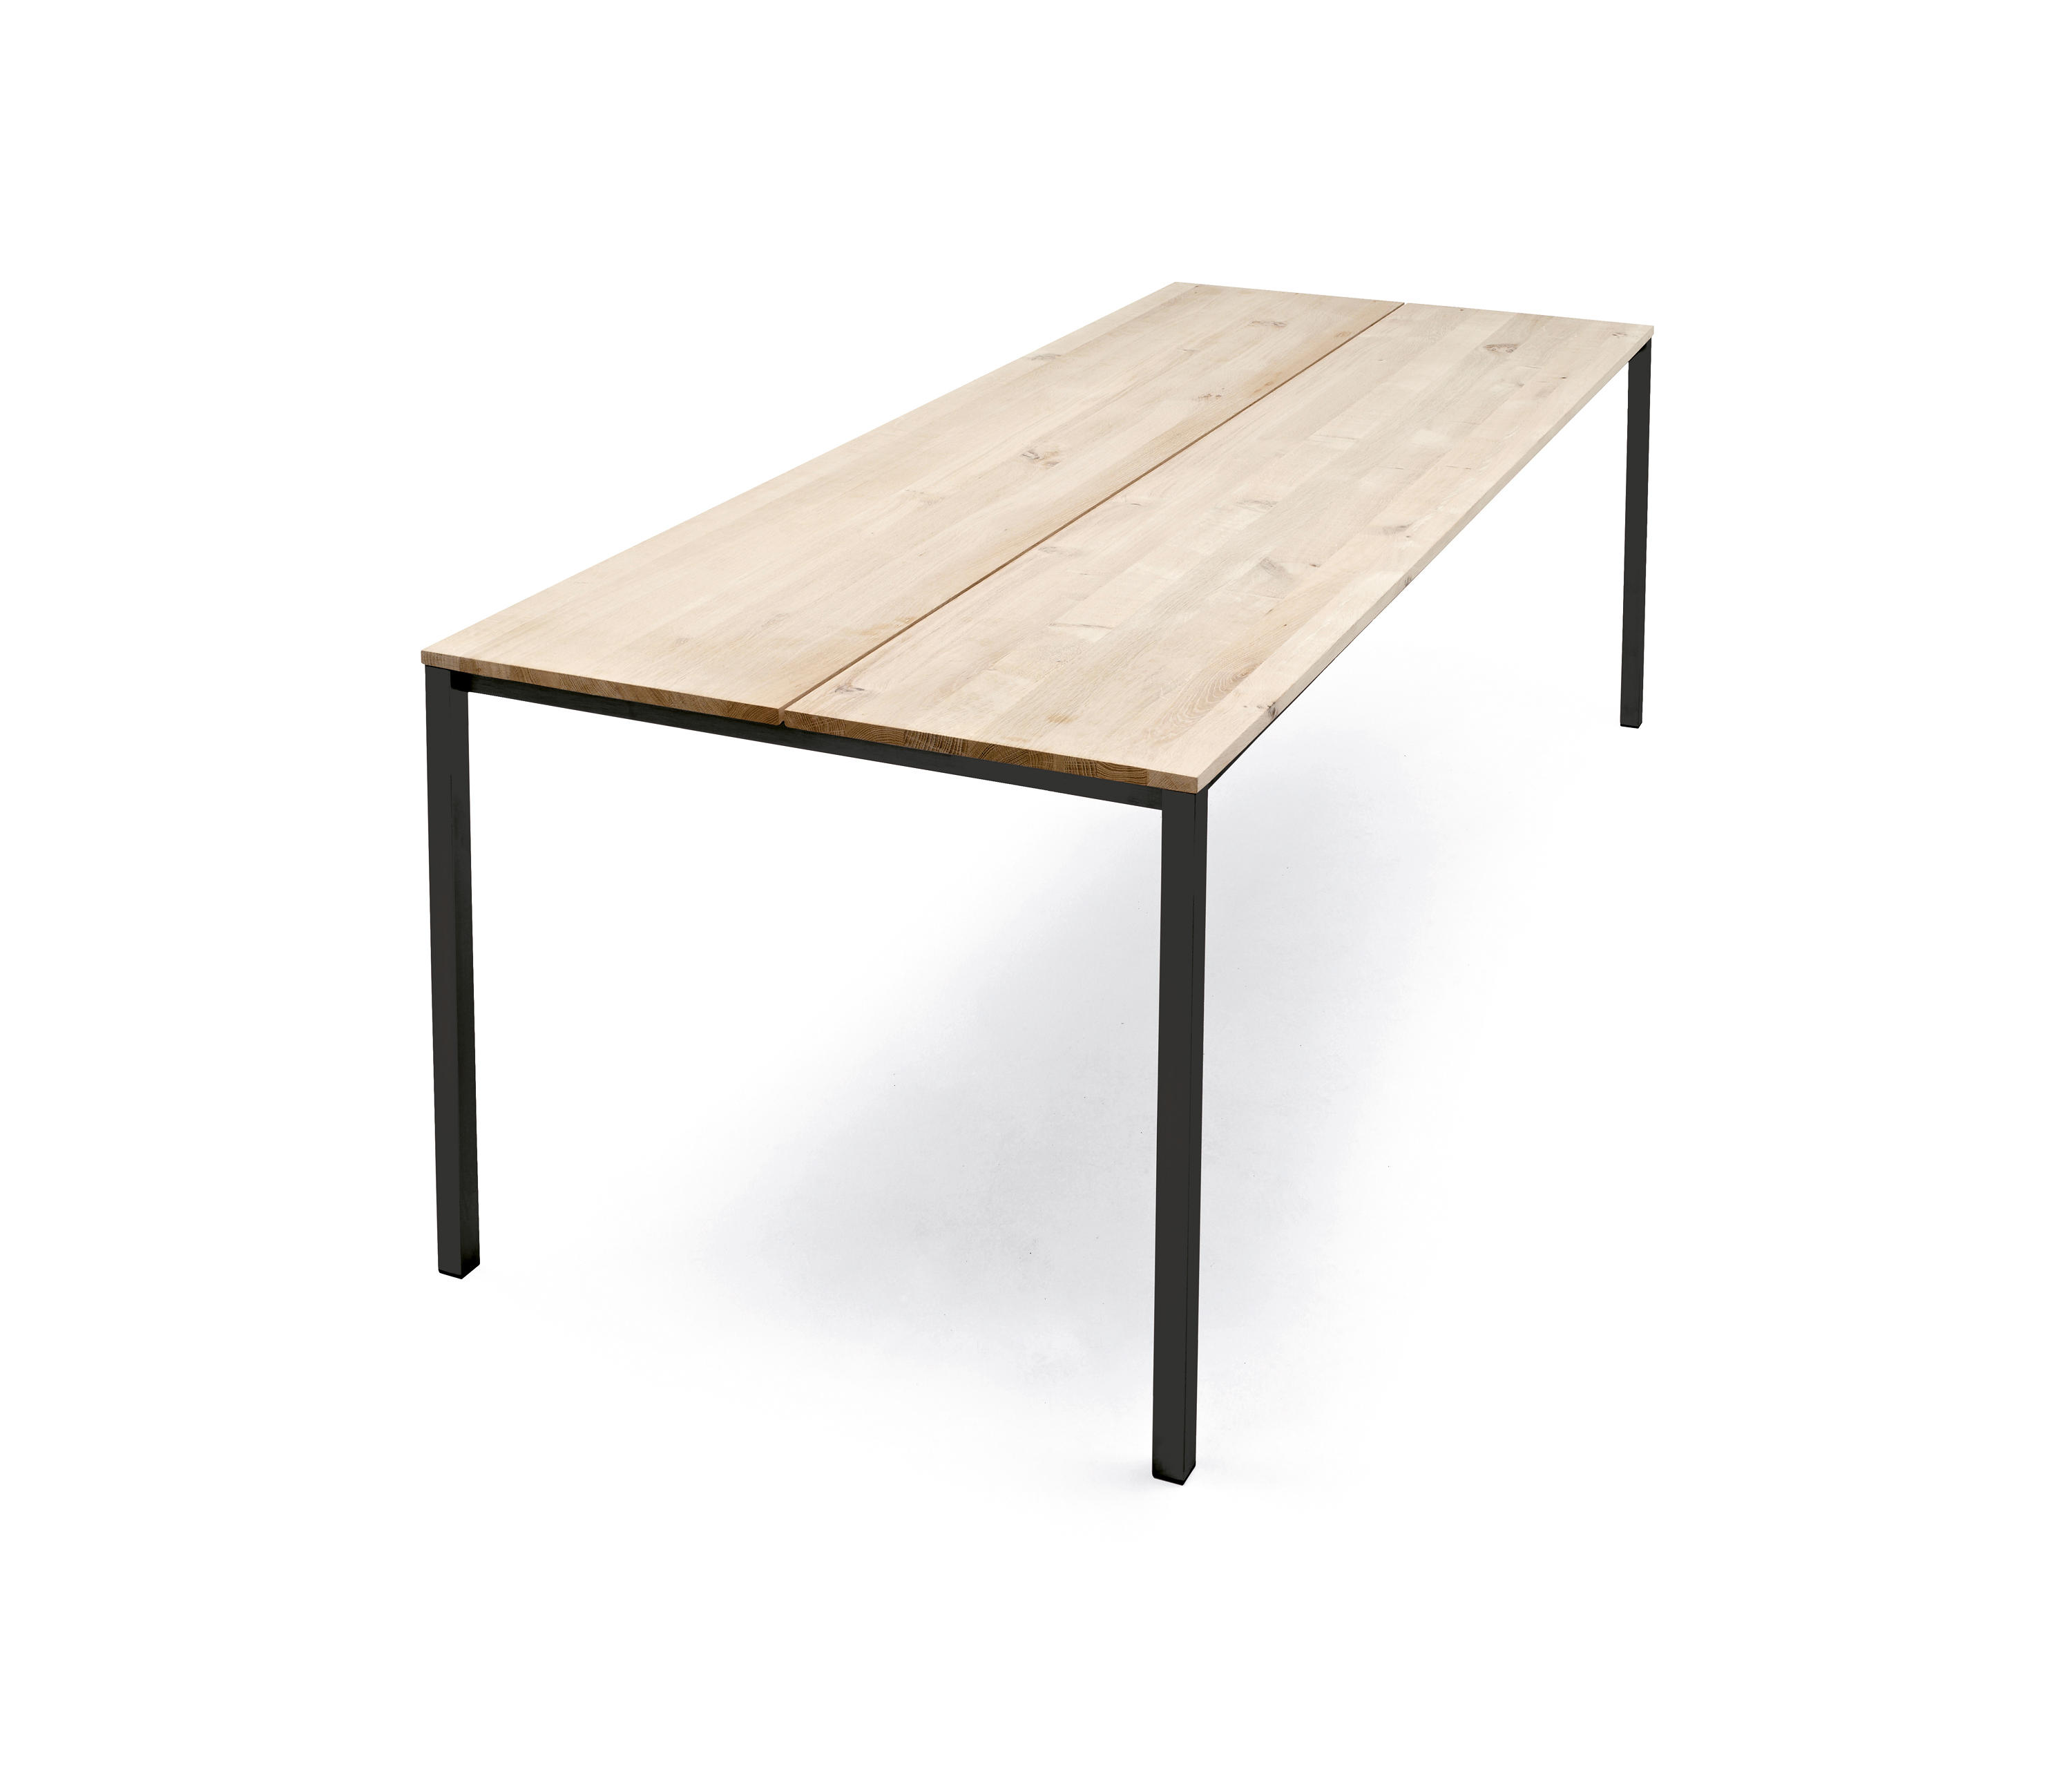 Less Is More Table Designer Furniture Architonic